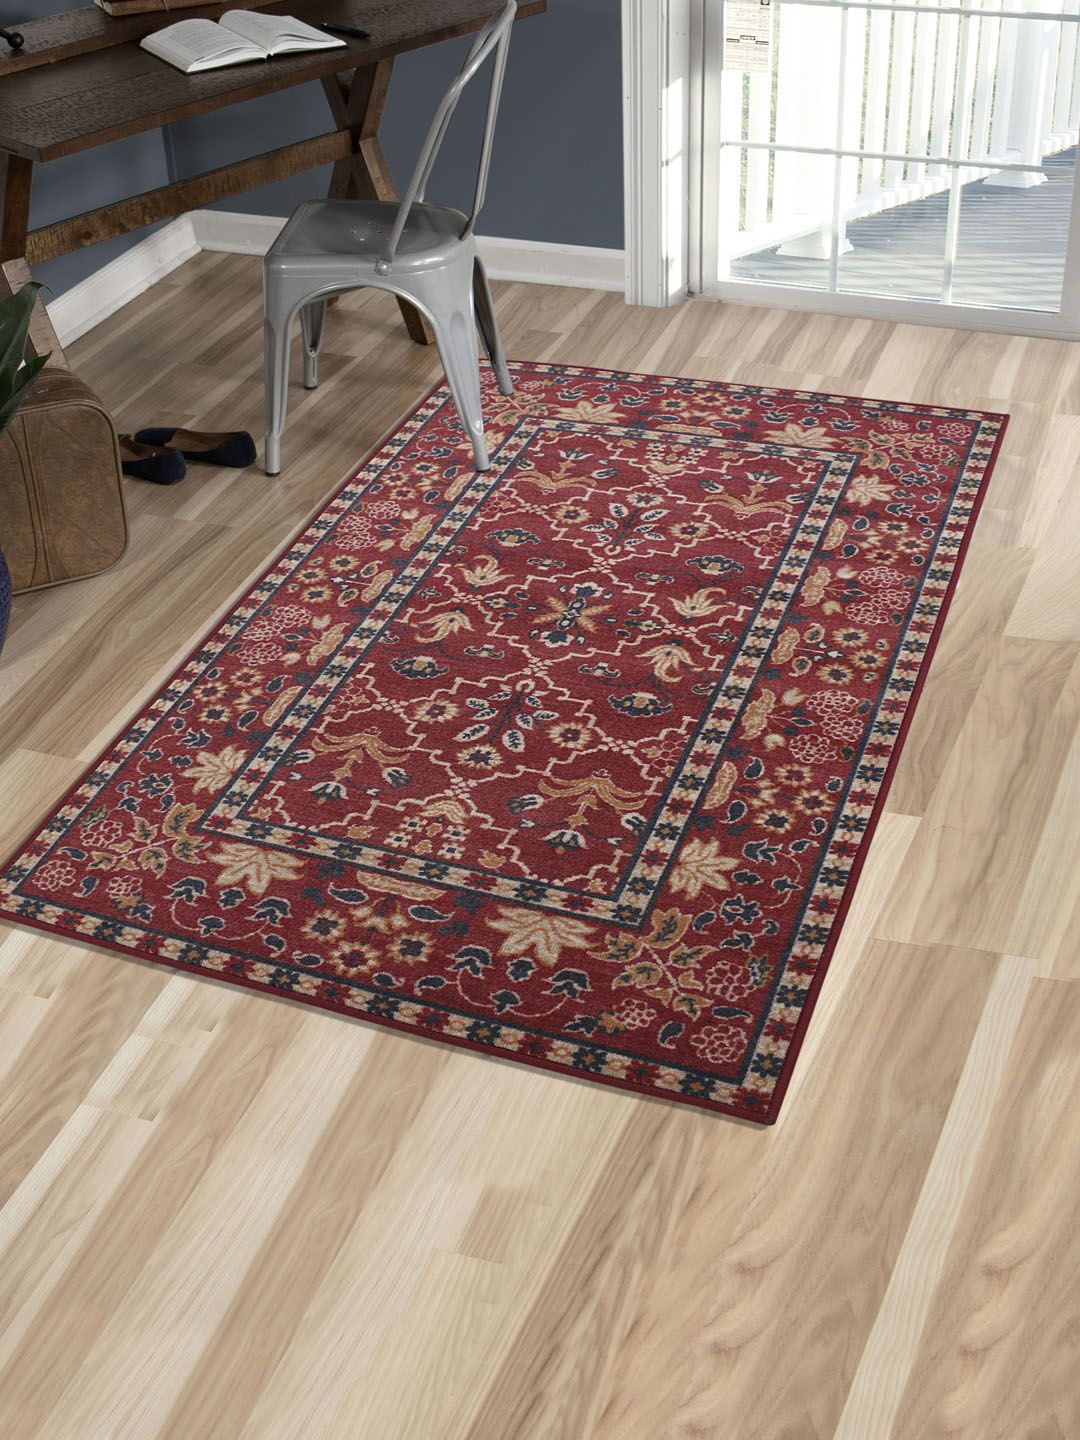 RUGSMITH Red & Black Patterned Anti-Skid Rectangle Carpet Price in India